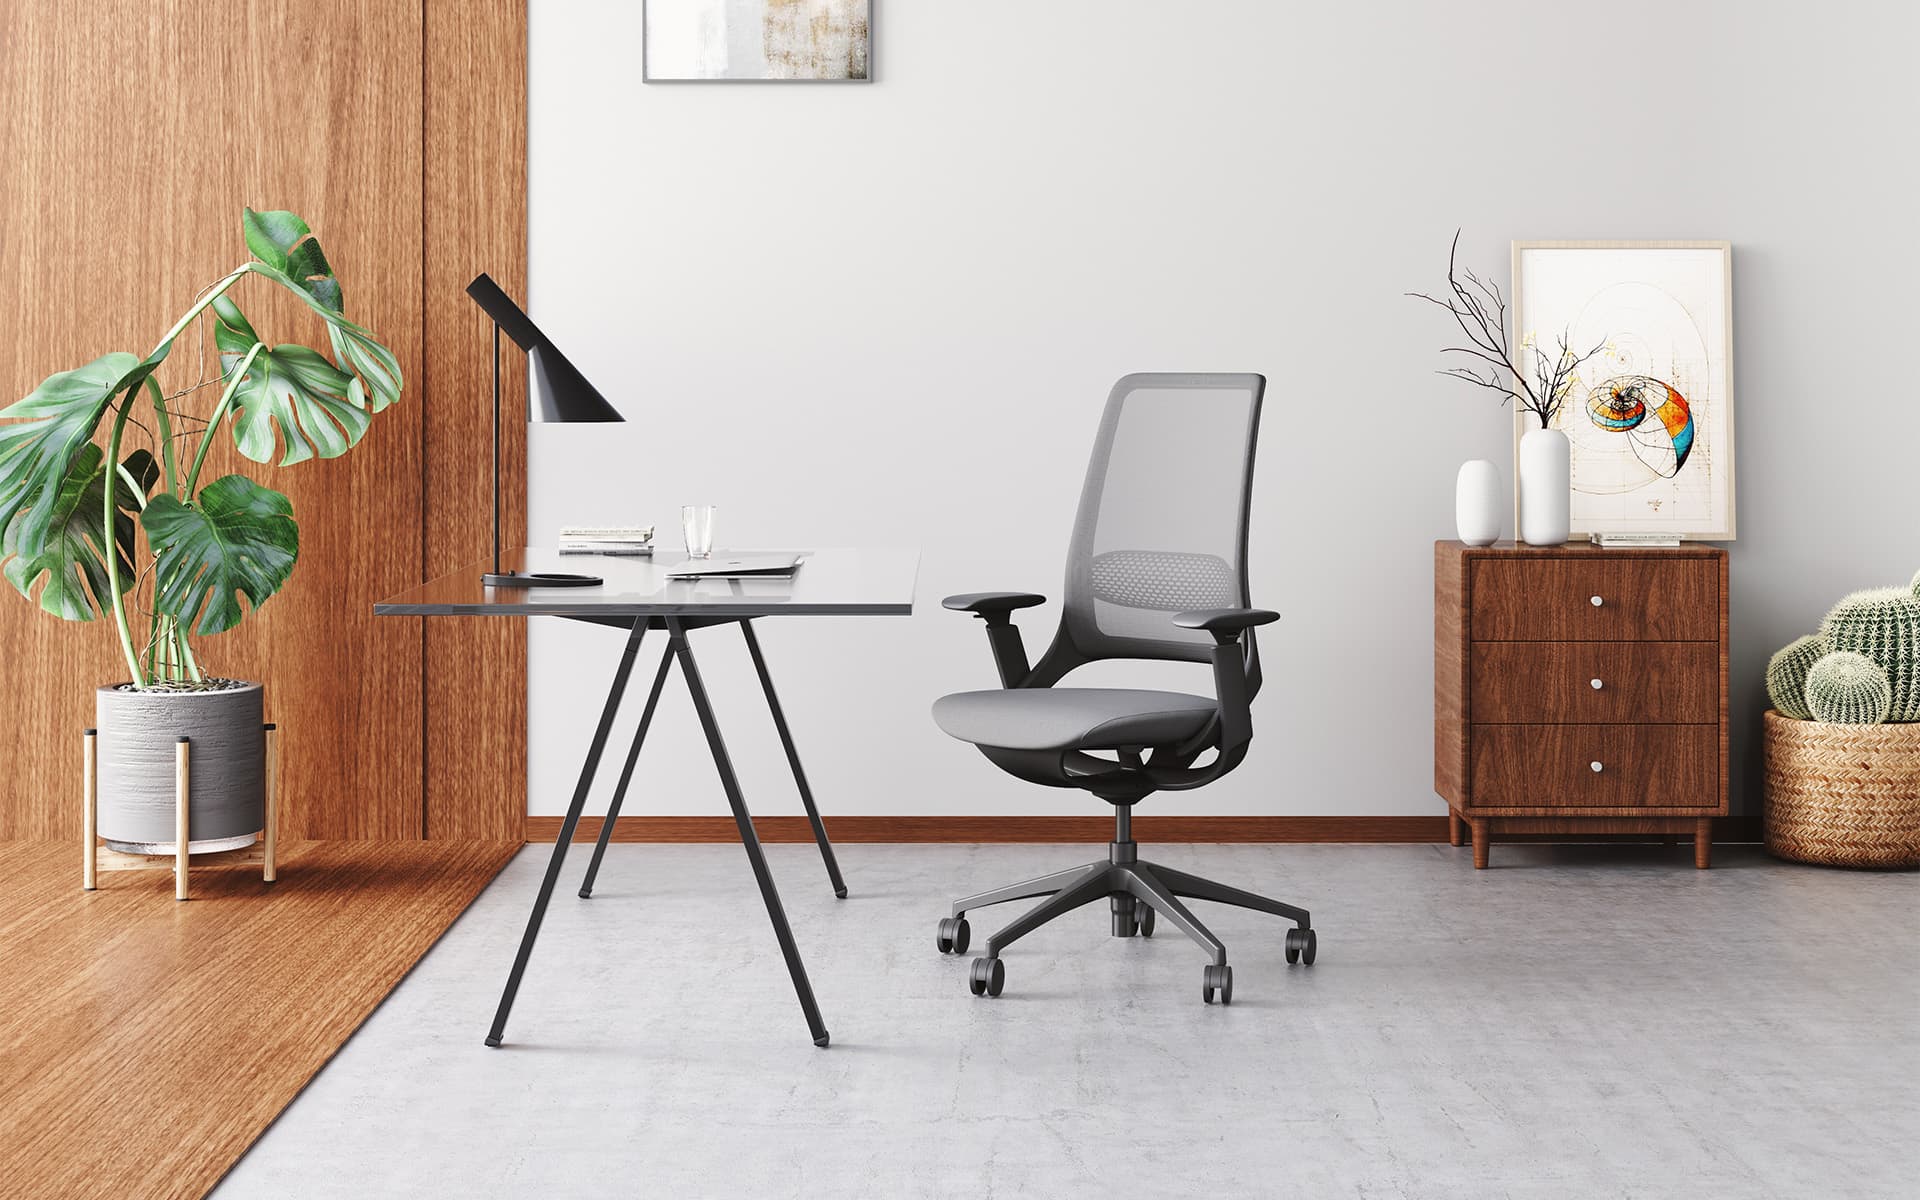 Enova Hug office chair by ITO Design in black with grey upholstery and mesh in a modern, cozy office room